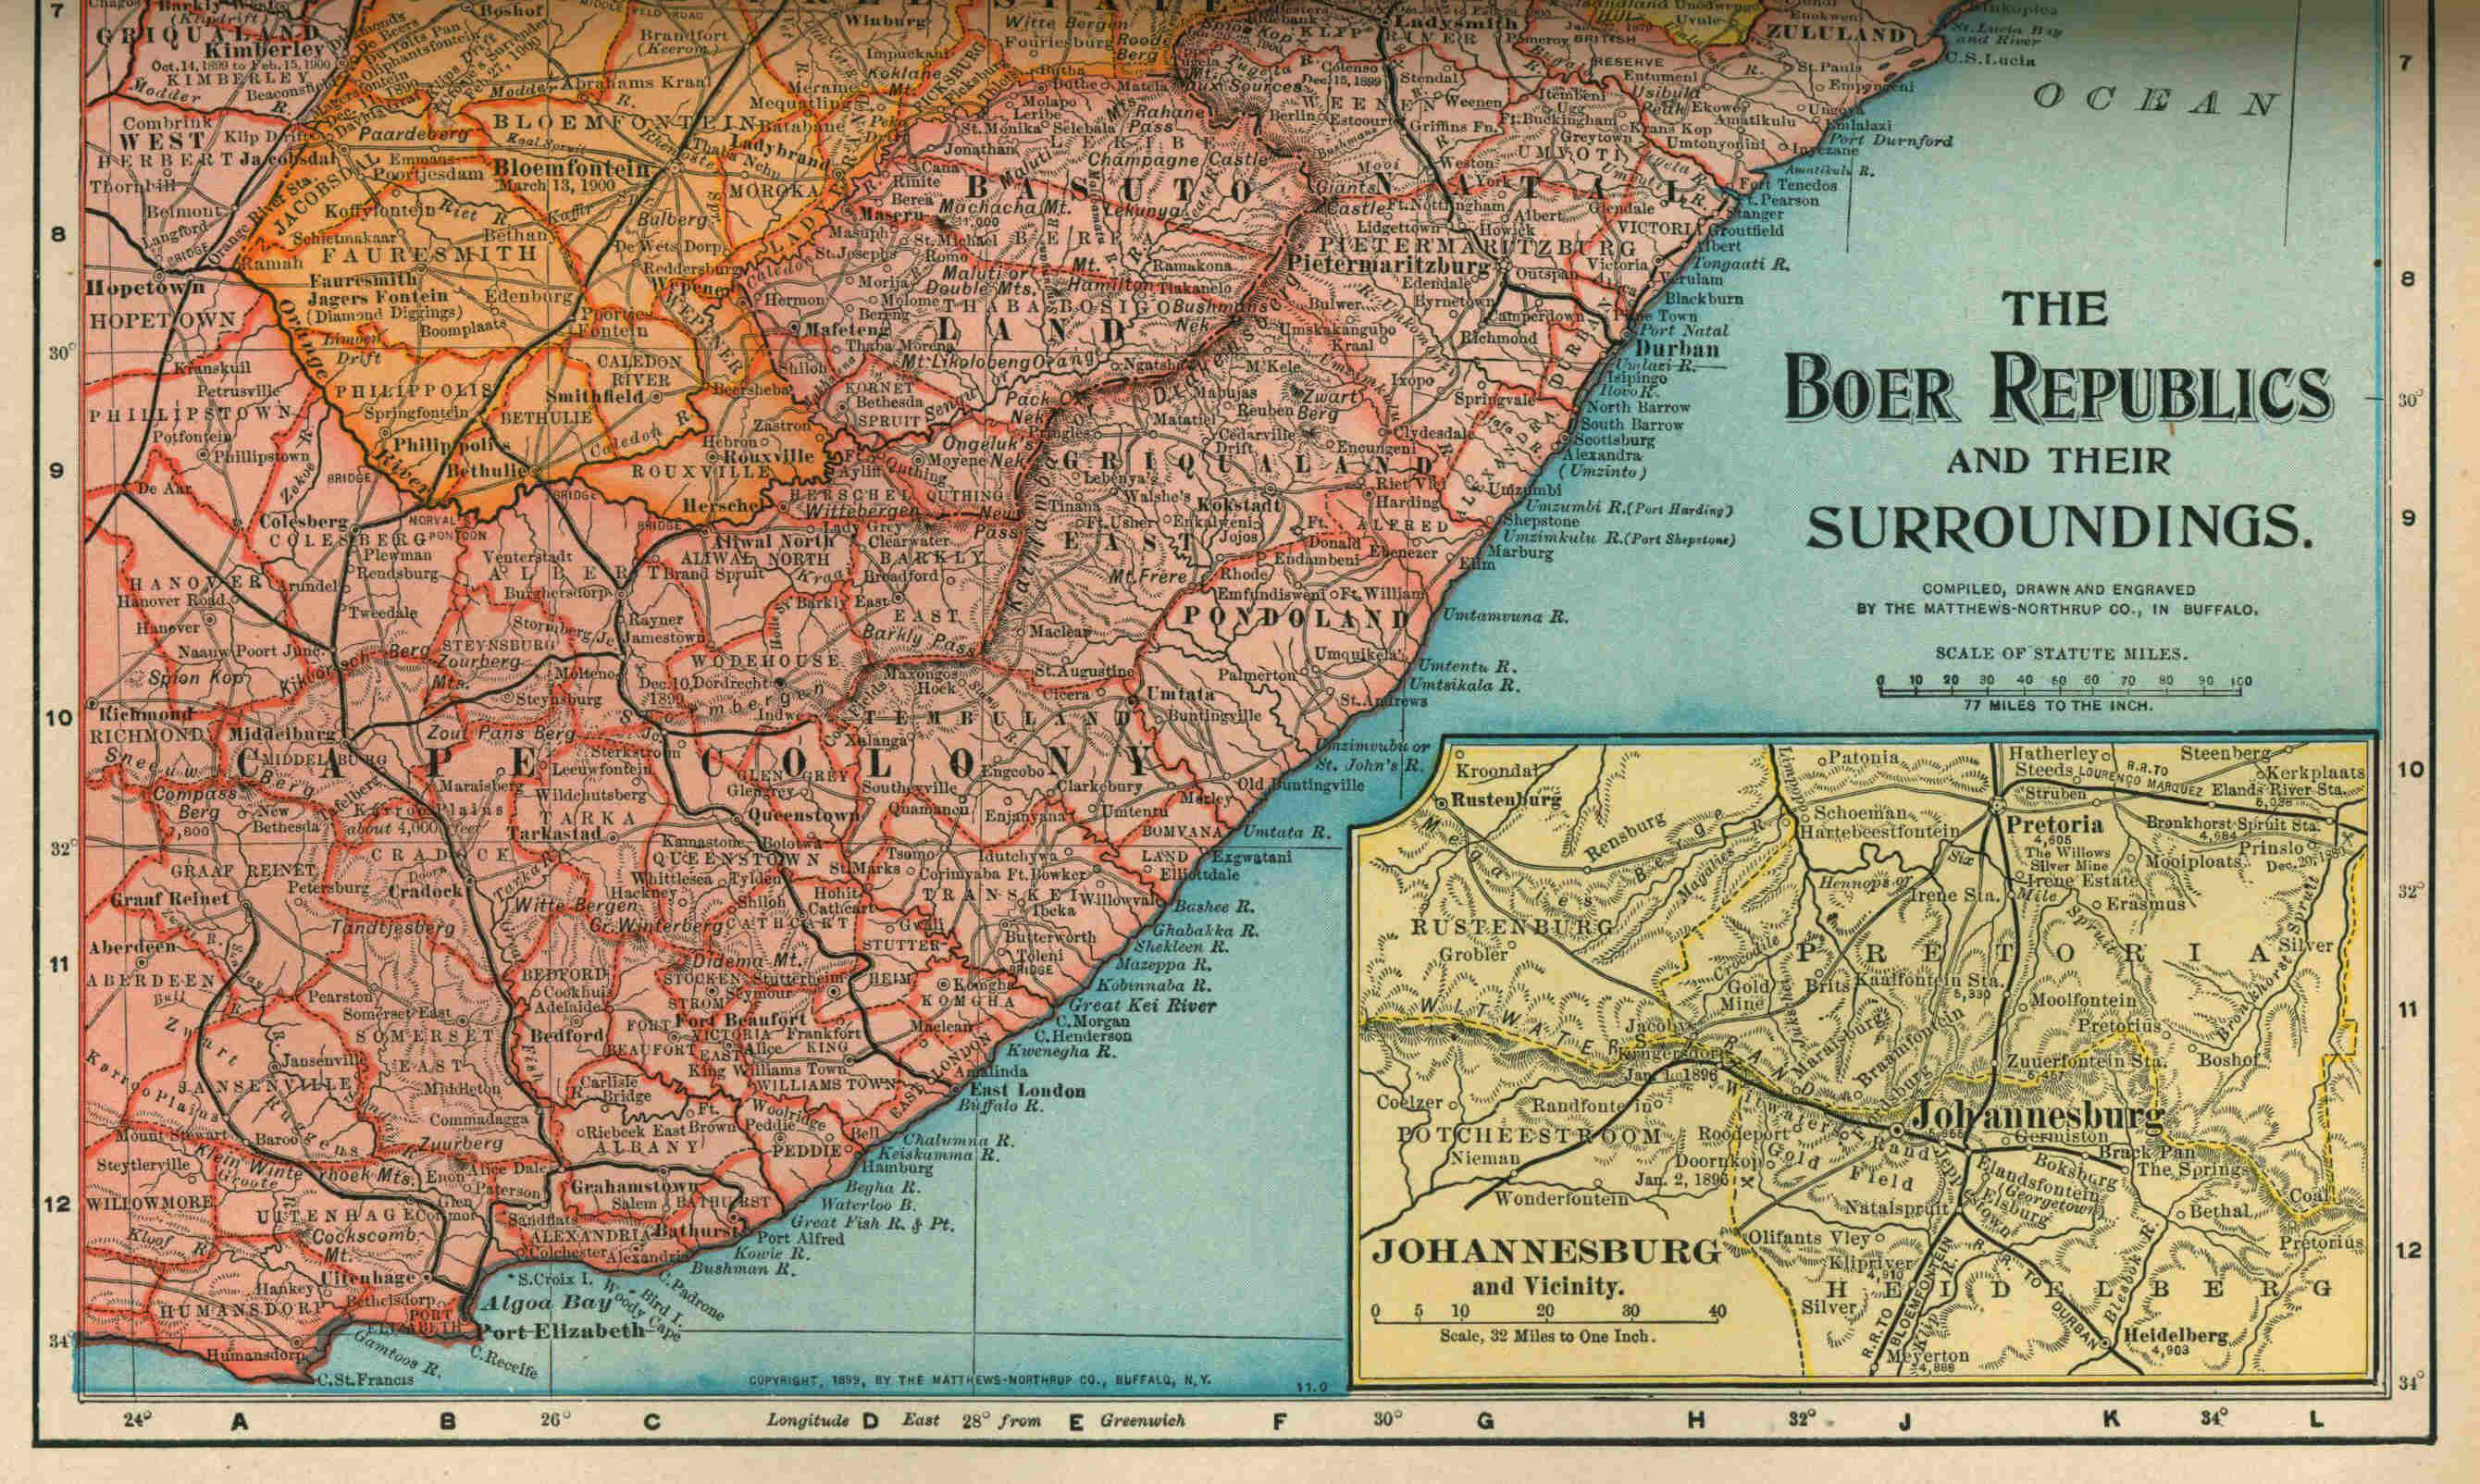 The Boer Republics and the Surroundings.